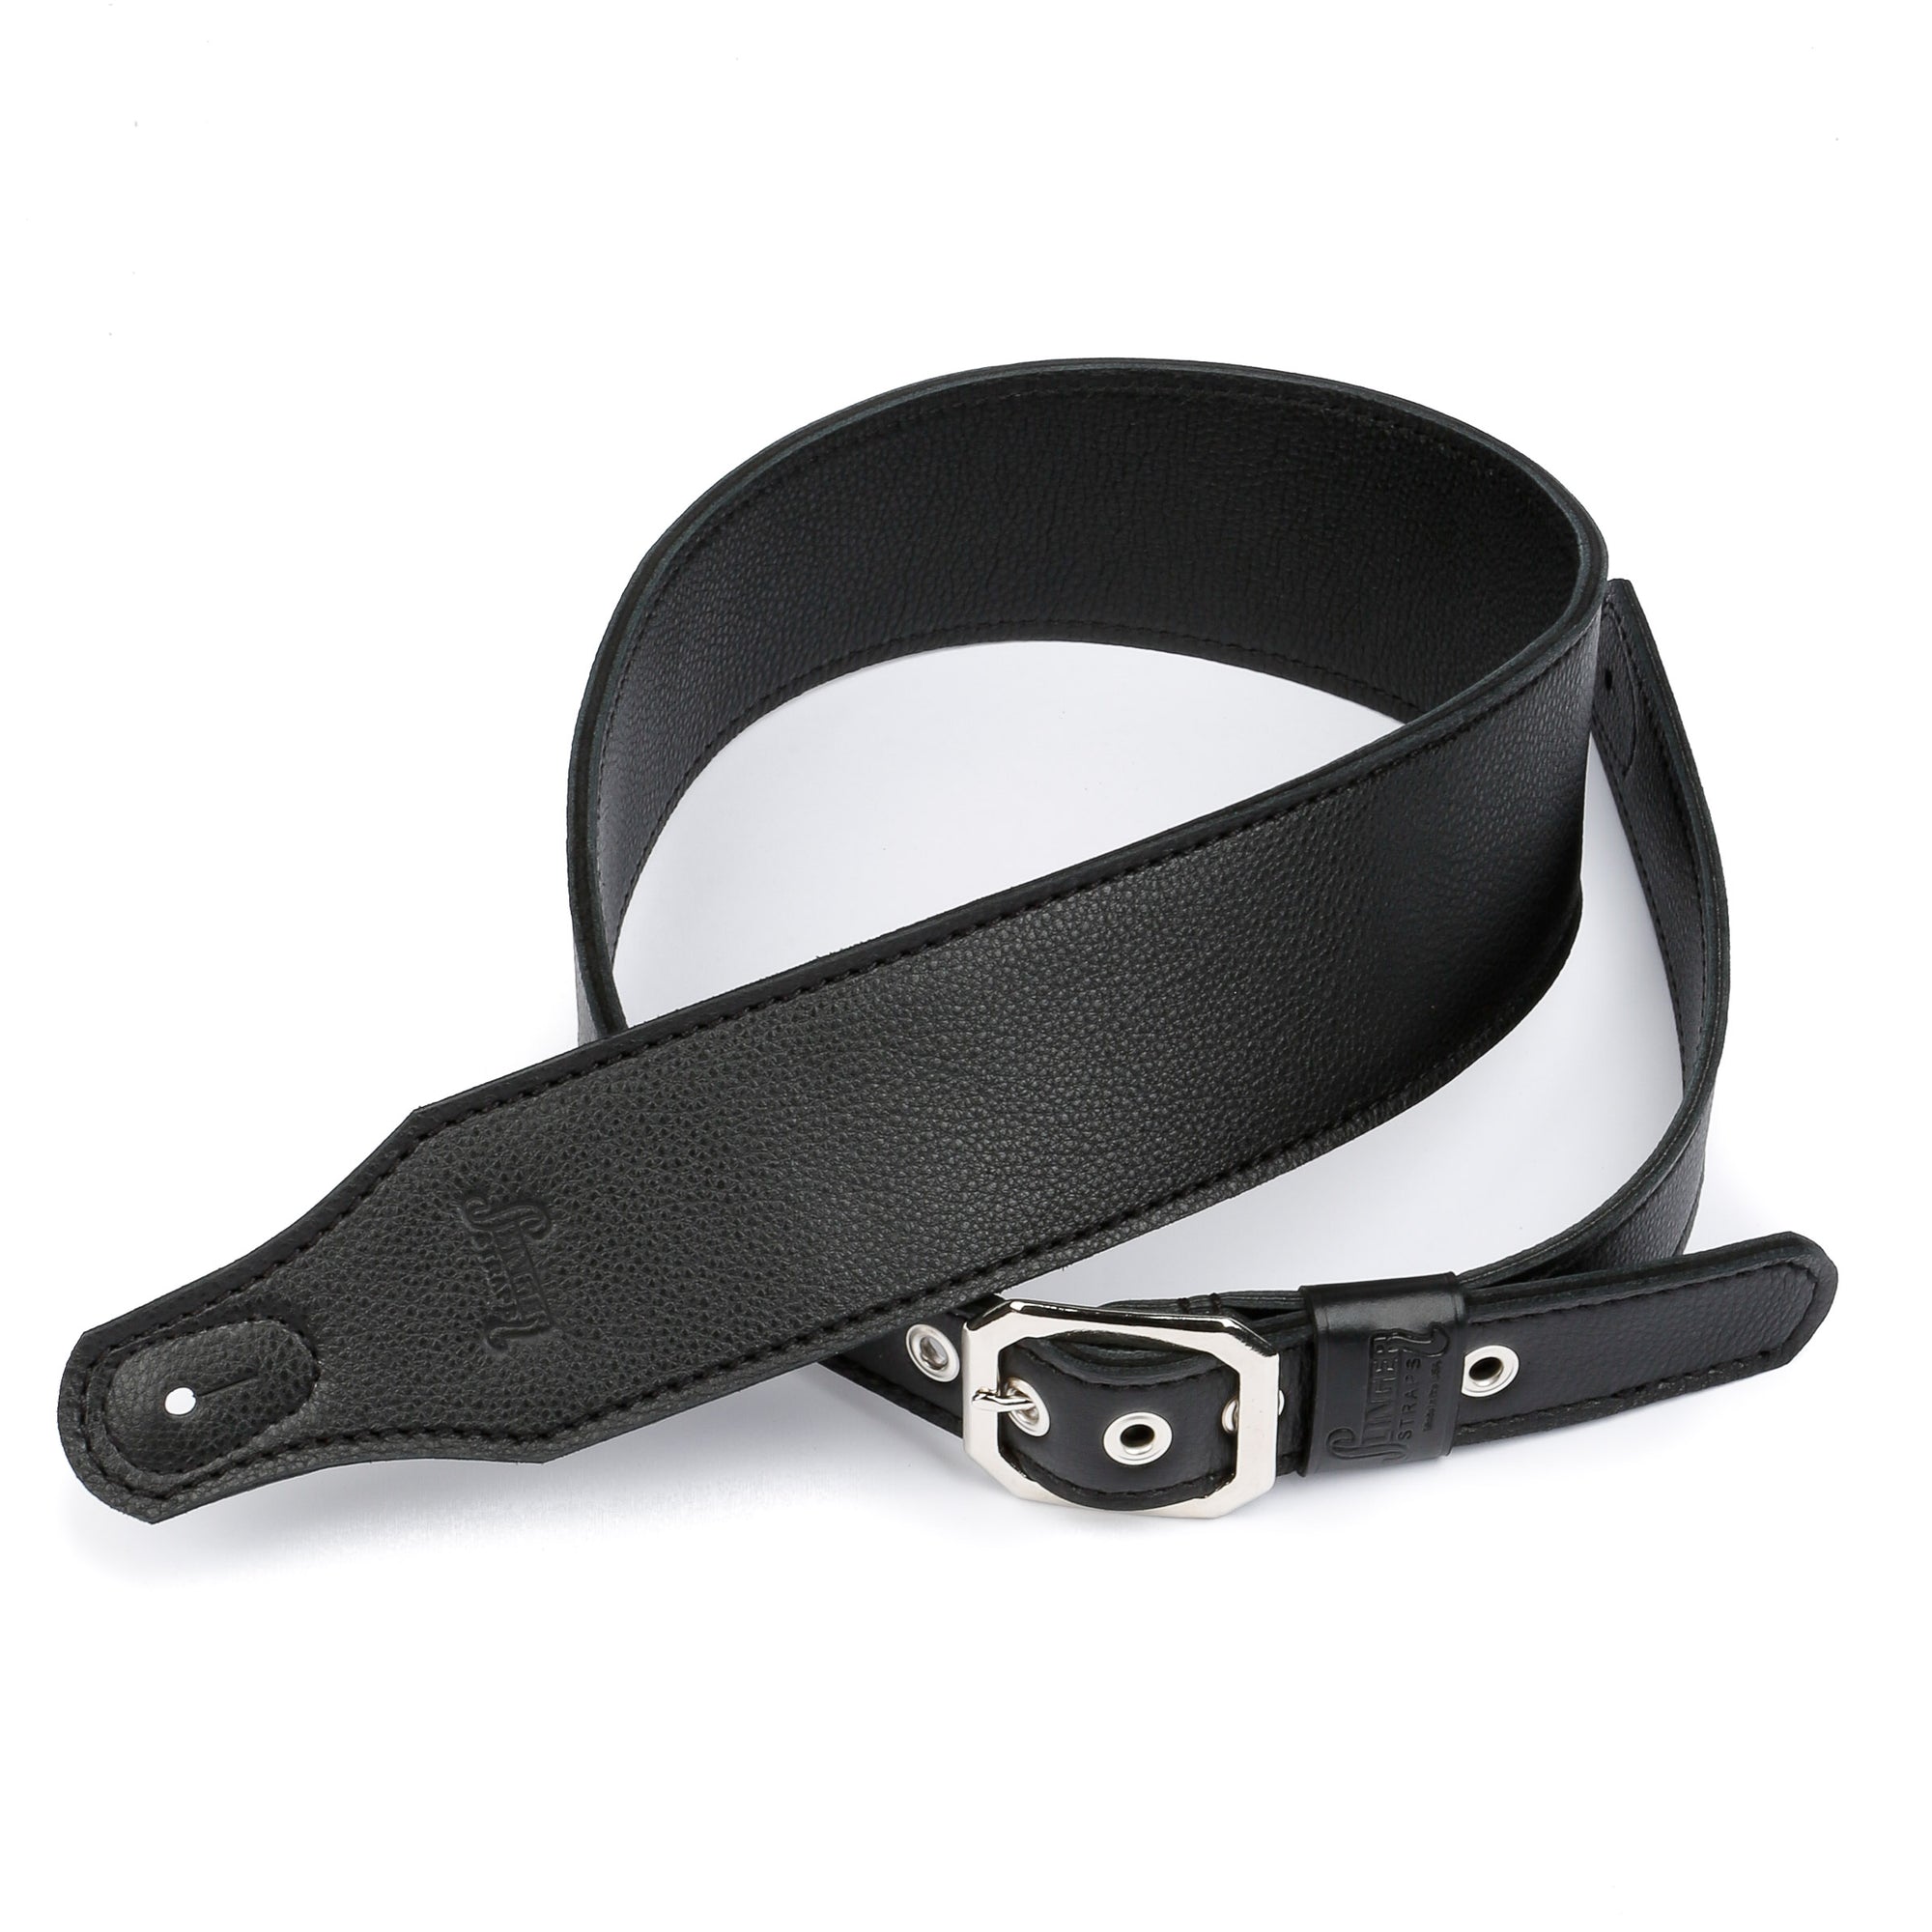 3" wide black pebble finished leather guitar strap with nickel clipped corner buckle and grommets on side